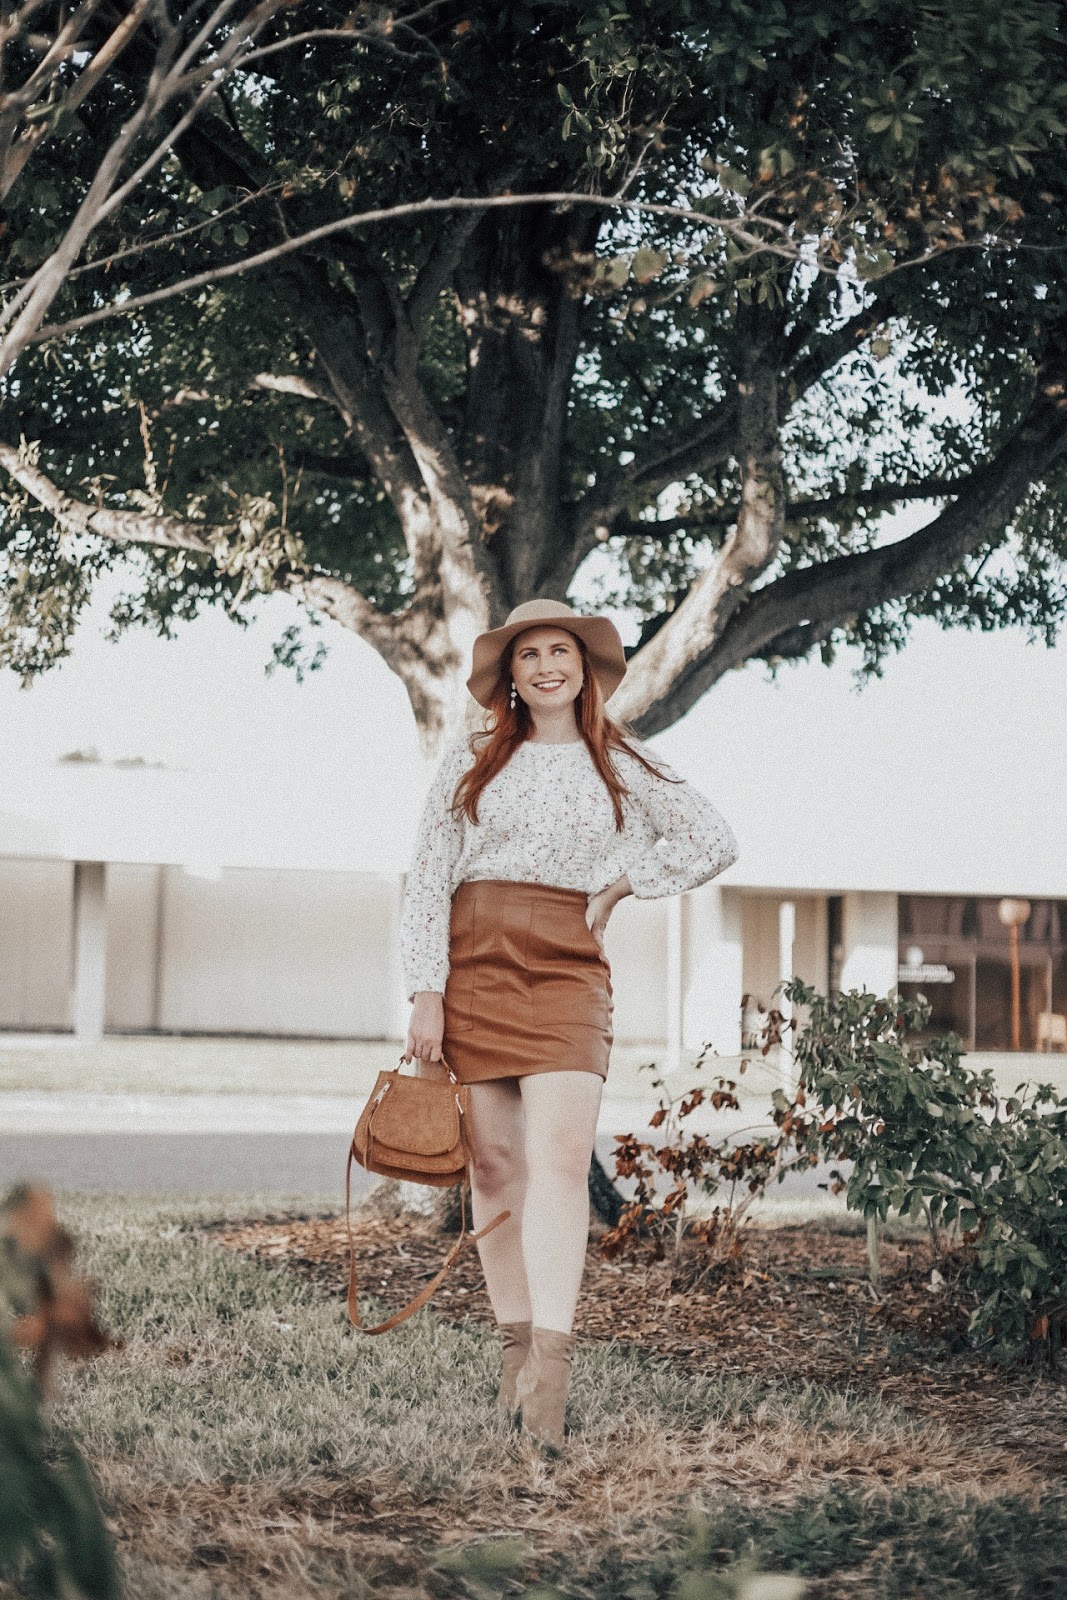 25+ Affordable Sweaters To Wear With Faux Leather Skirts | Affordable by Amanda, a Style Blog by Tampa Blogger Amanda Burrows | Florida Blogger Amanda Burrows shares Her Sweaters with Faux Leather Skirts for Less